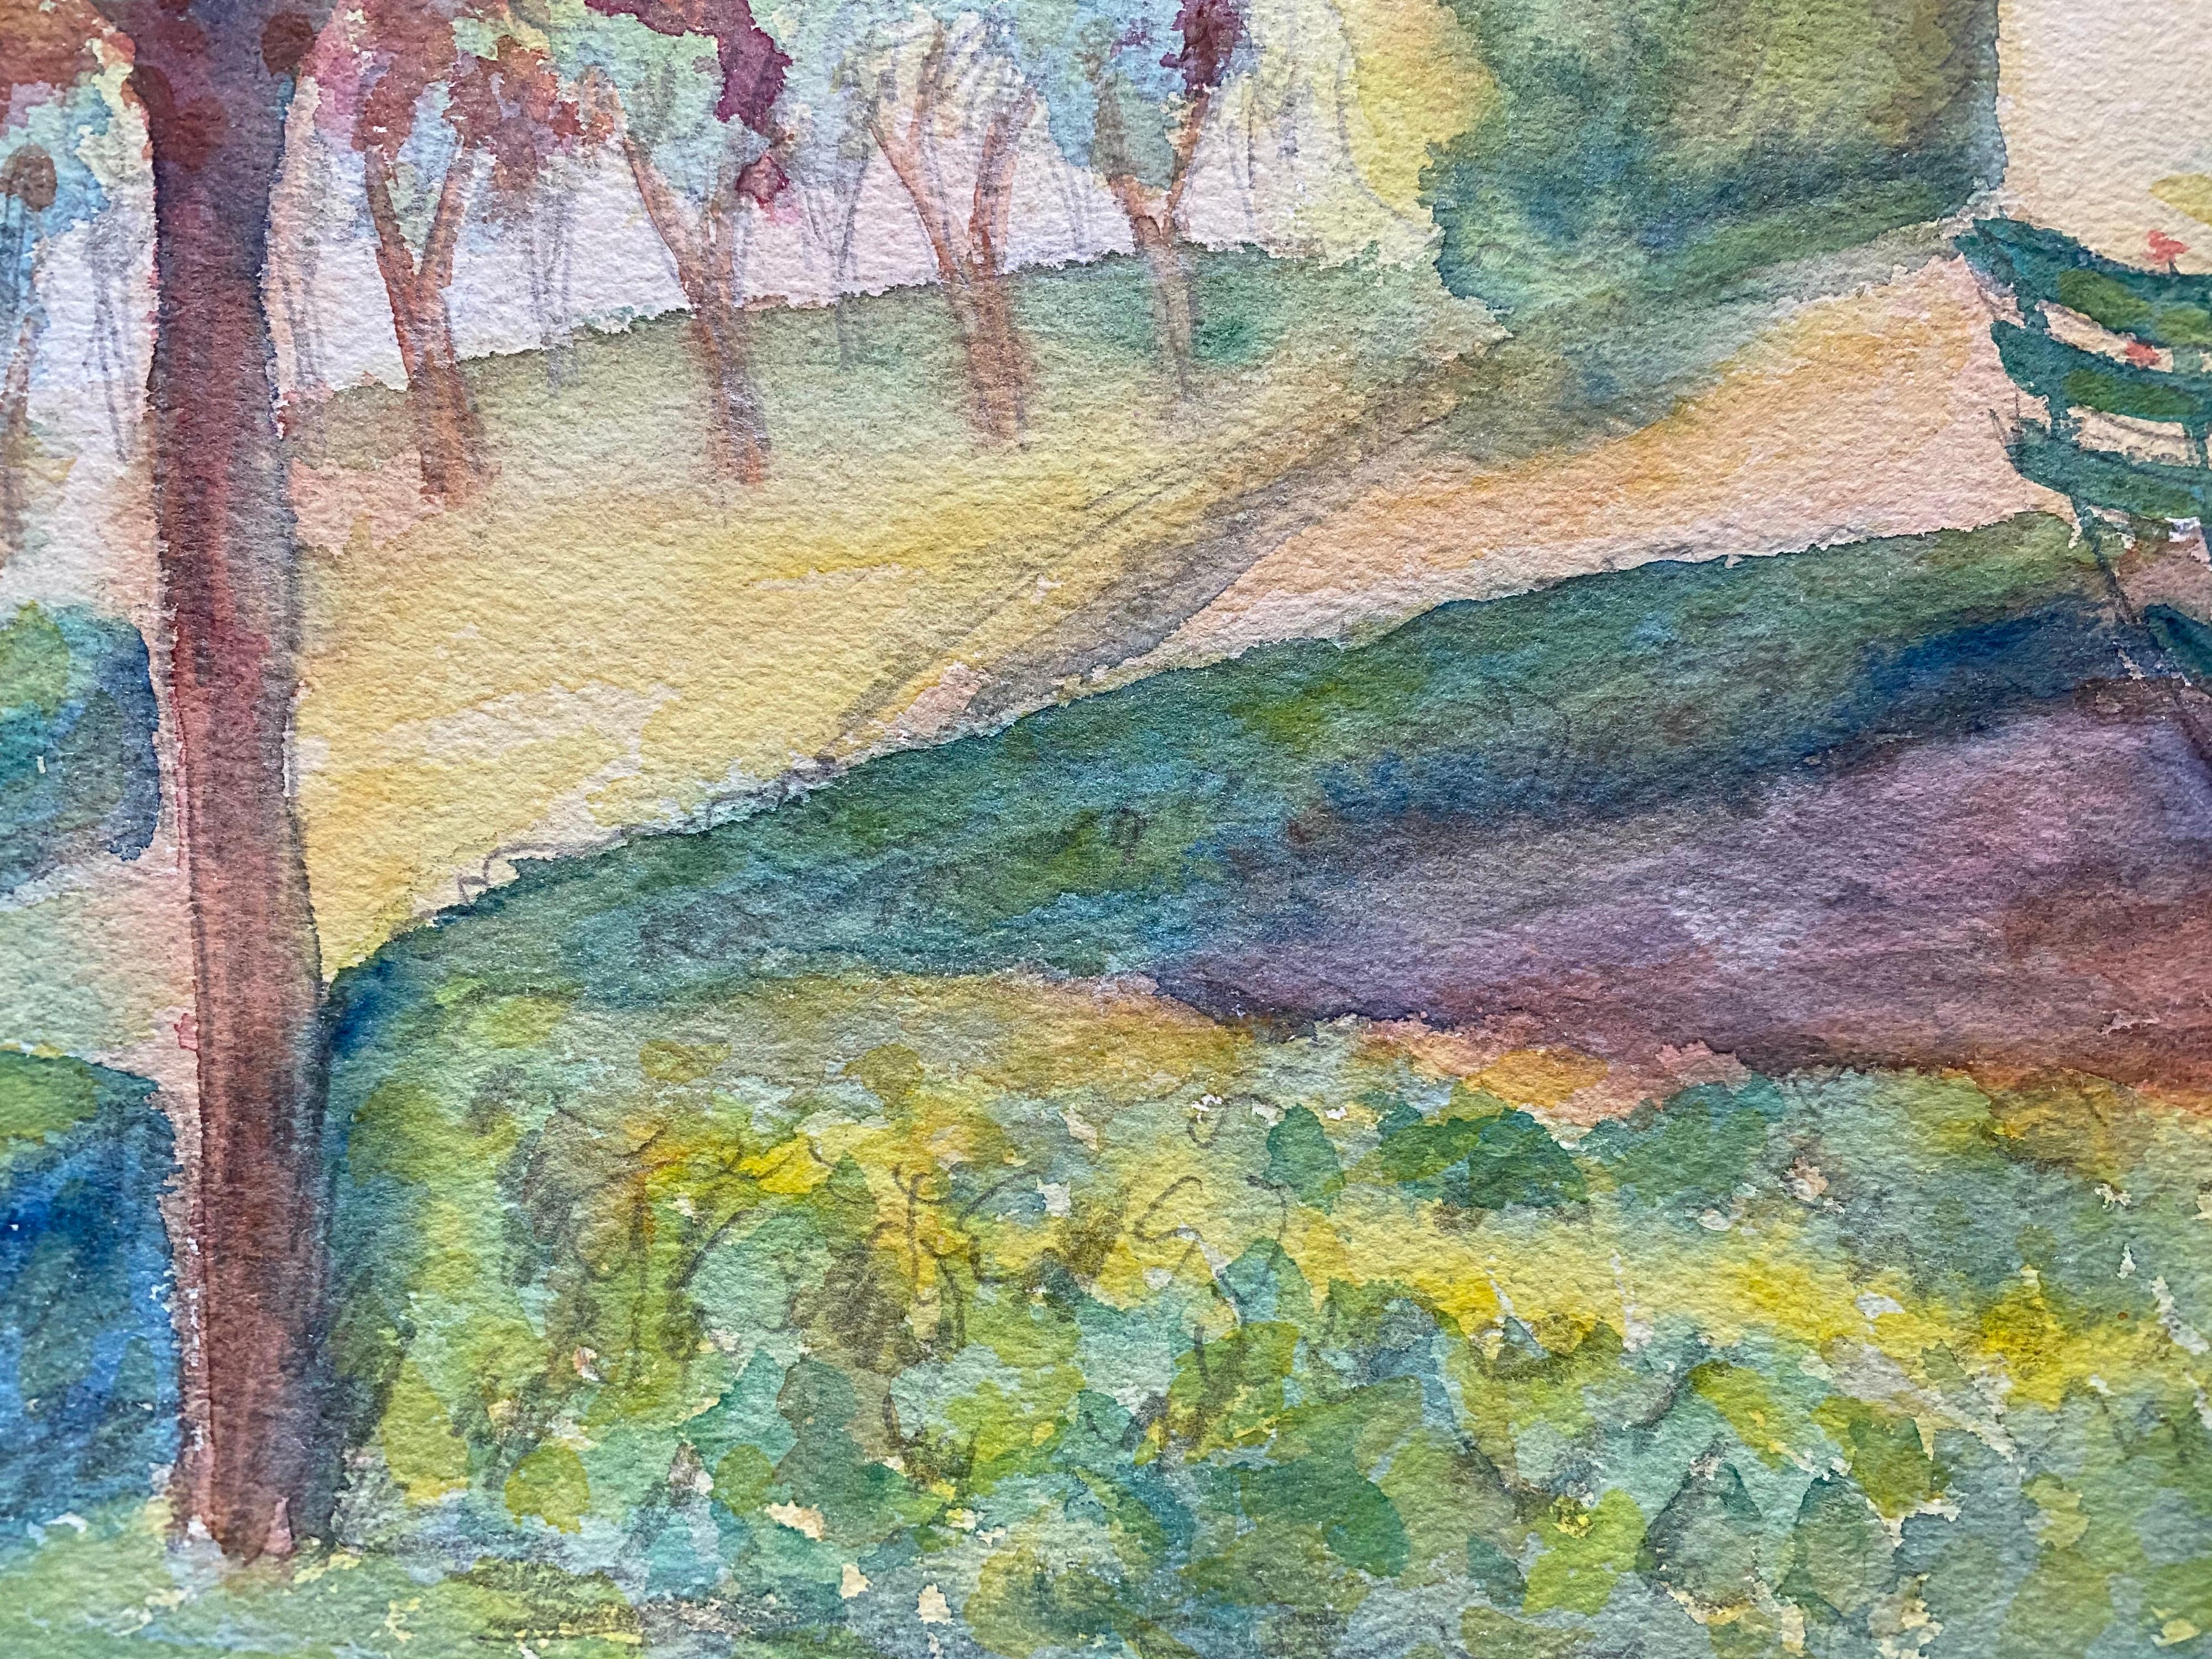 Provencal Landscape
by Louis Bellon (French 1908-1998)
inscribed verso
From a batch of similar work where most were dated 1942-1947
watercolour painting on paper, unframed

measurements: 10.75 x 13.5 inches

provenance: private collection of the